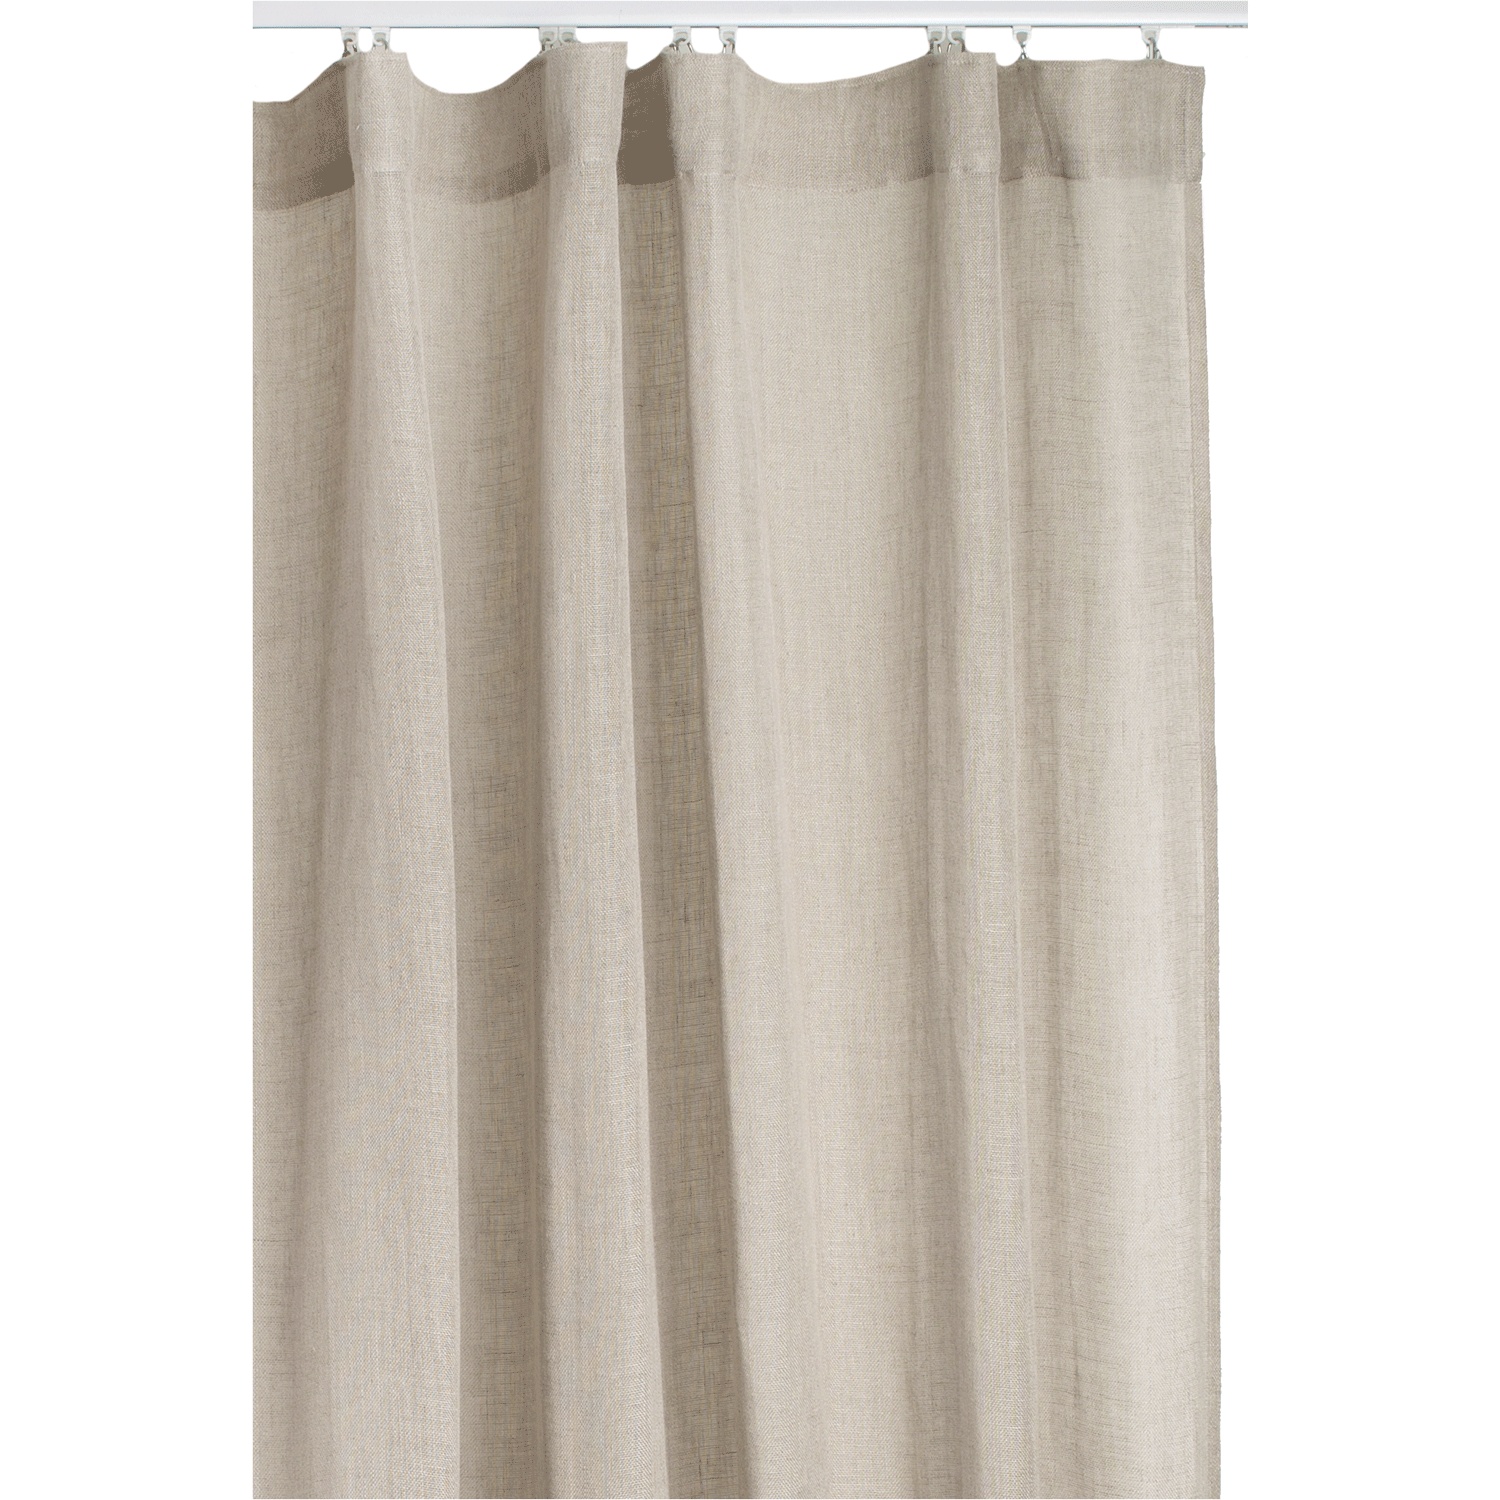 Macochico Self Sticky Curtains for Bedroom Self-Adhesive Drapes for Small  Windows, Side Wall Curtain Cost Saving Drapes Without Rod with Sticky Tape,  25 inch by 36 inch, Beige, 2 Panel : 